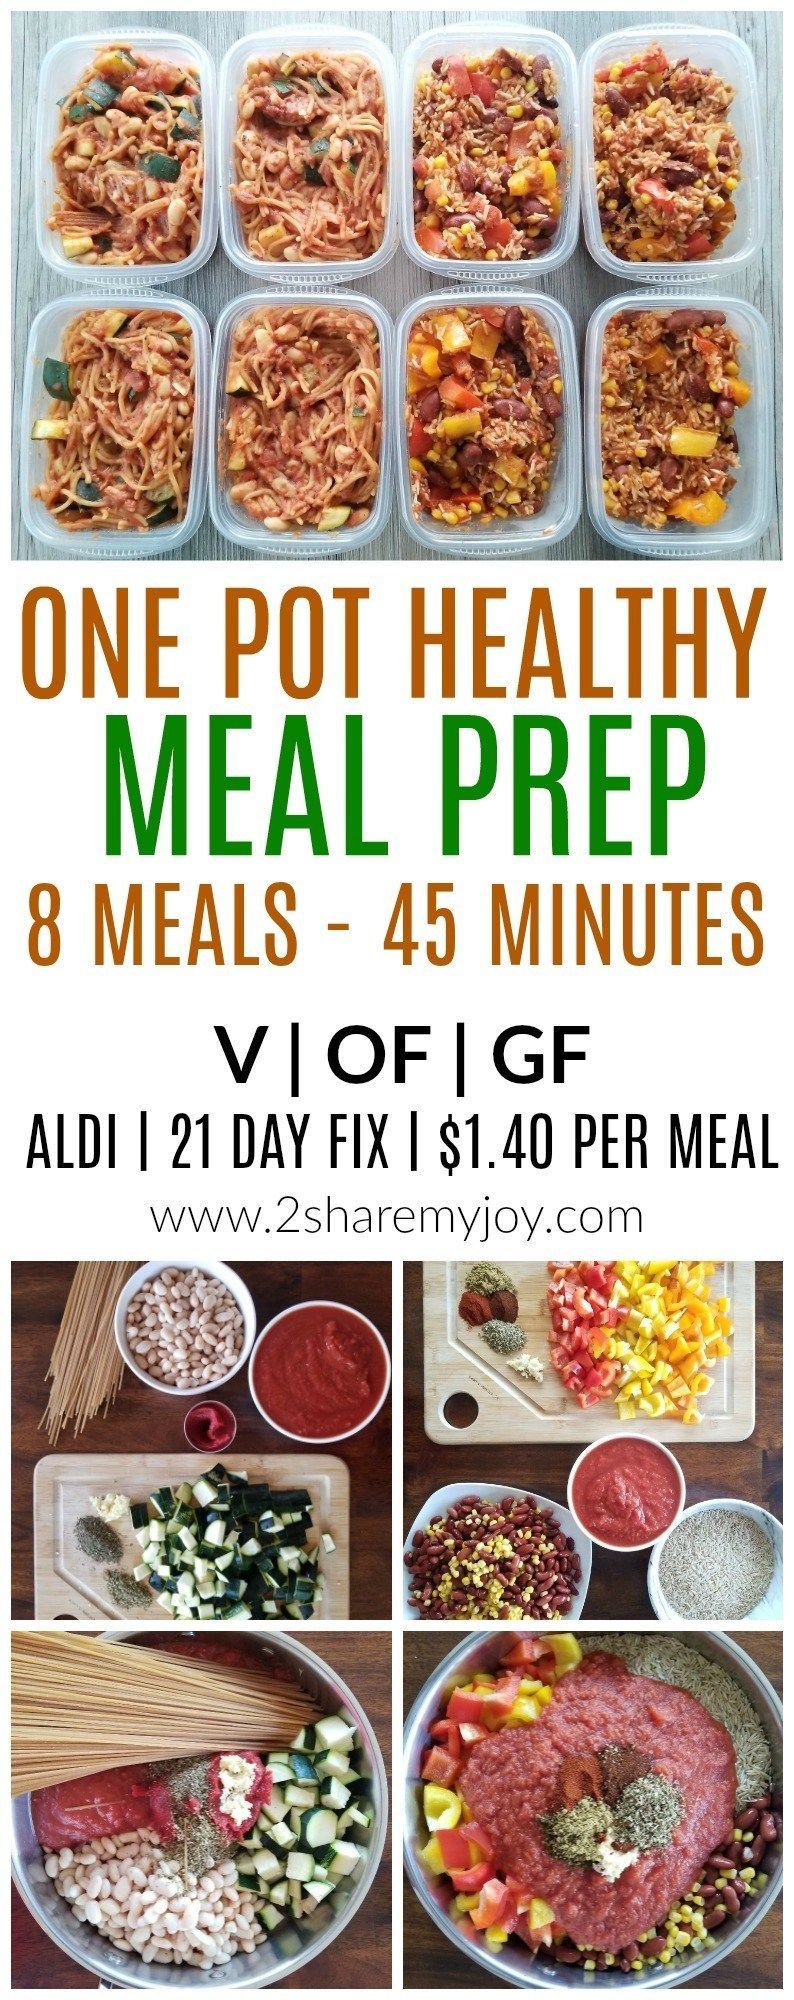 Vegan Meal Prep On A Budget : 8 Meals under 45 Minutes - Vegan Meal Prep On A Budget : 8 Meals under 45 Minutes -   19 meal prep recipes for weight loss cheap ideas